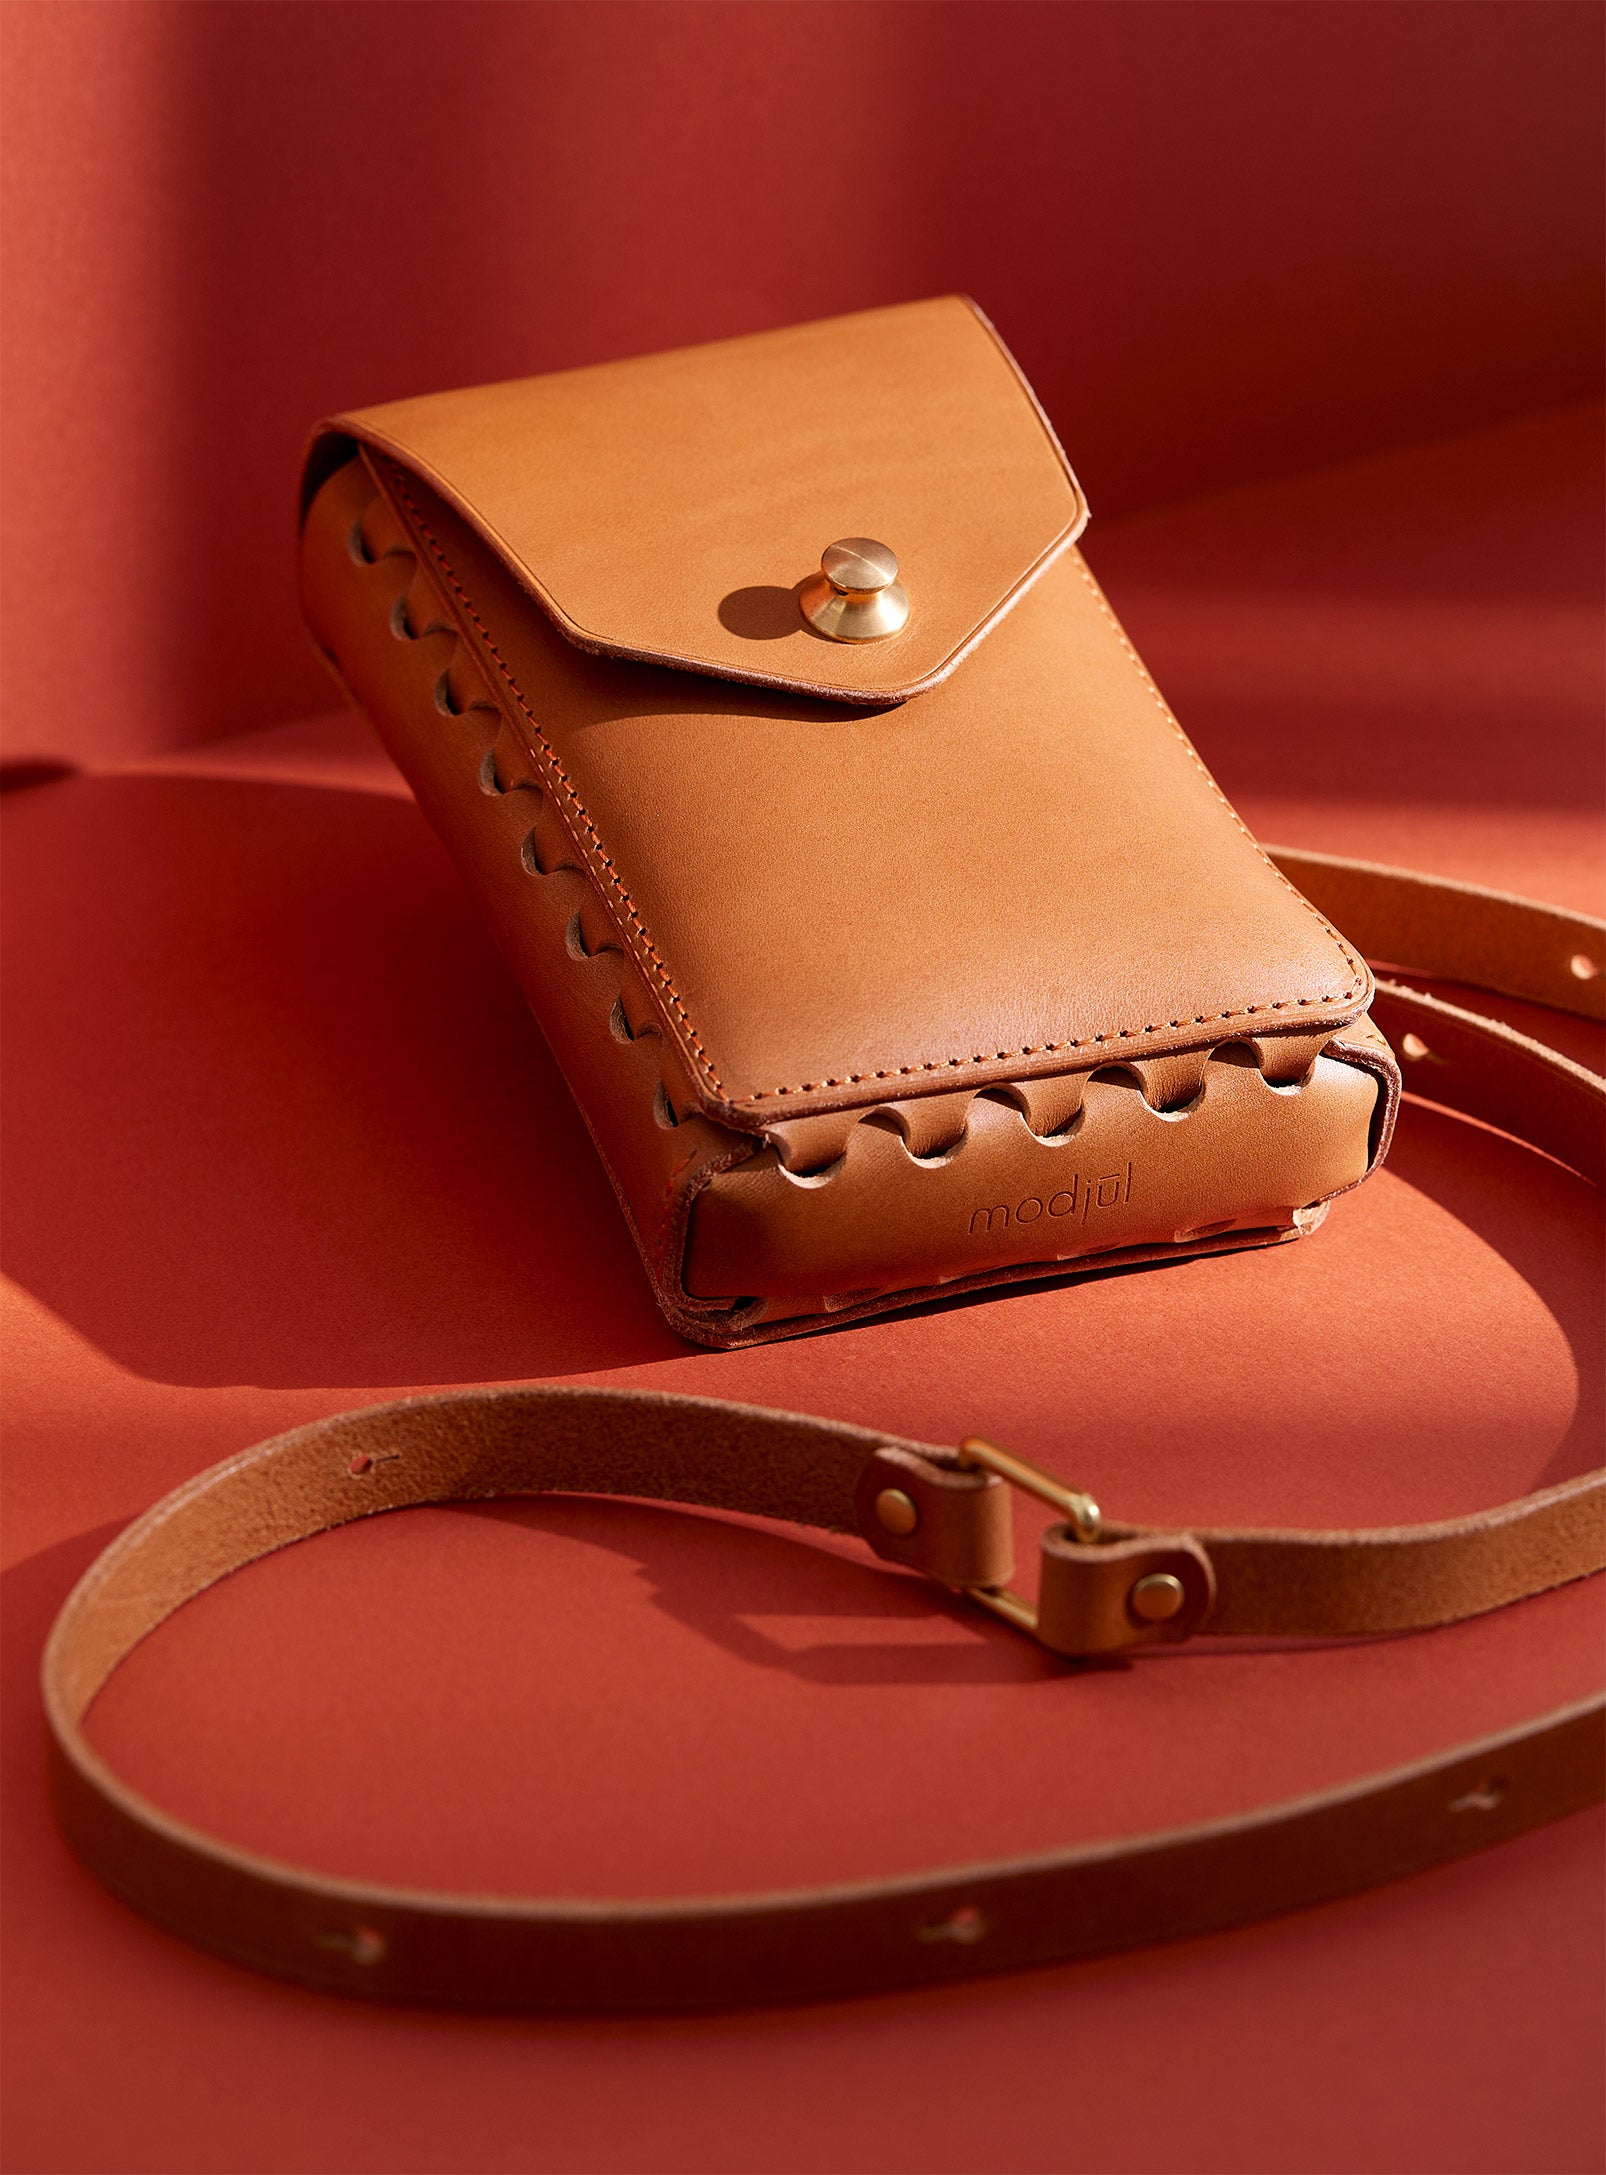 modjūl's capsule leather bag in camel. A rectangular-shaped bag with long straps, the perfect bag for a phone.